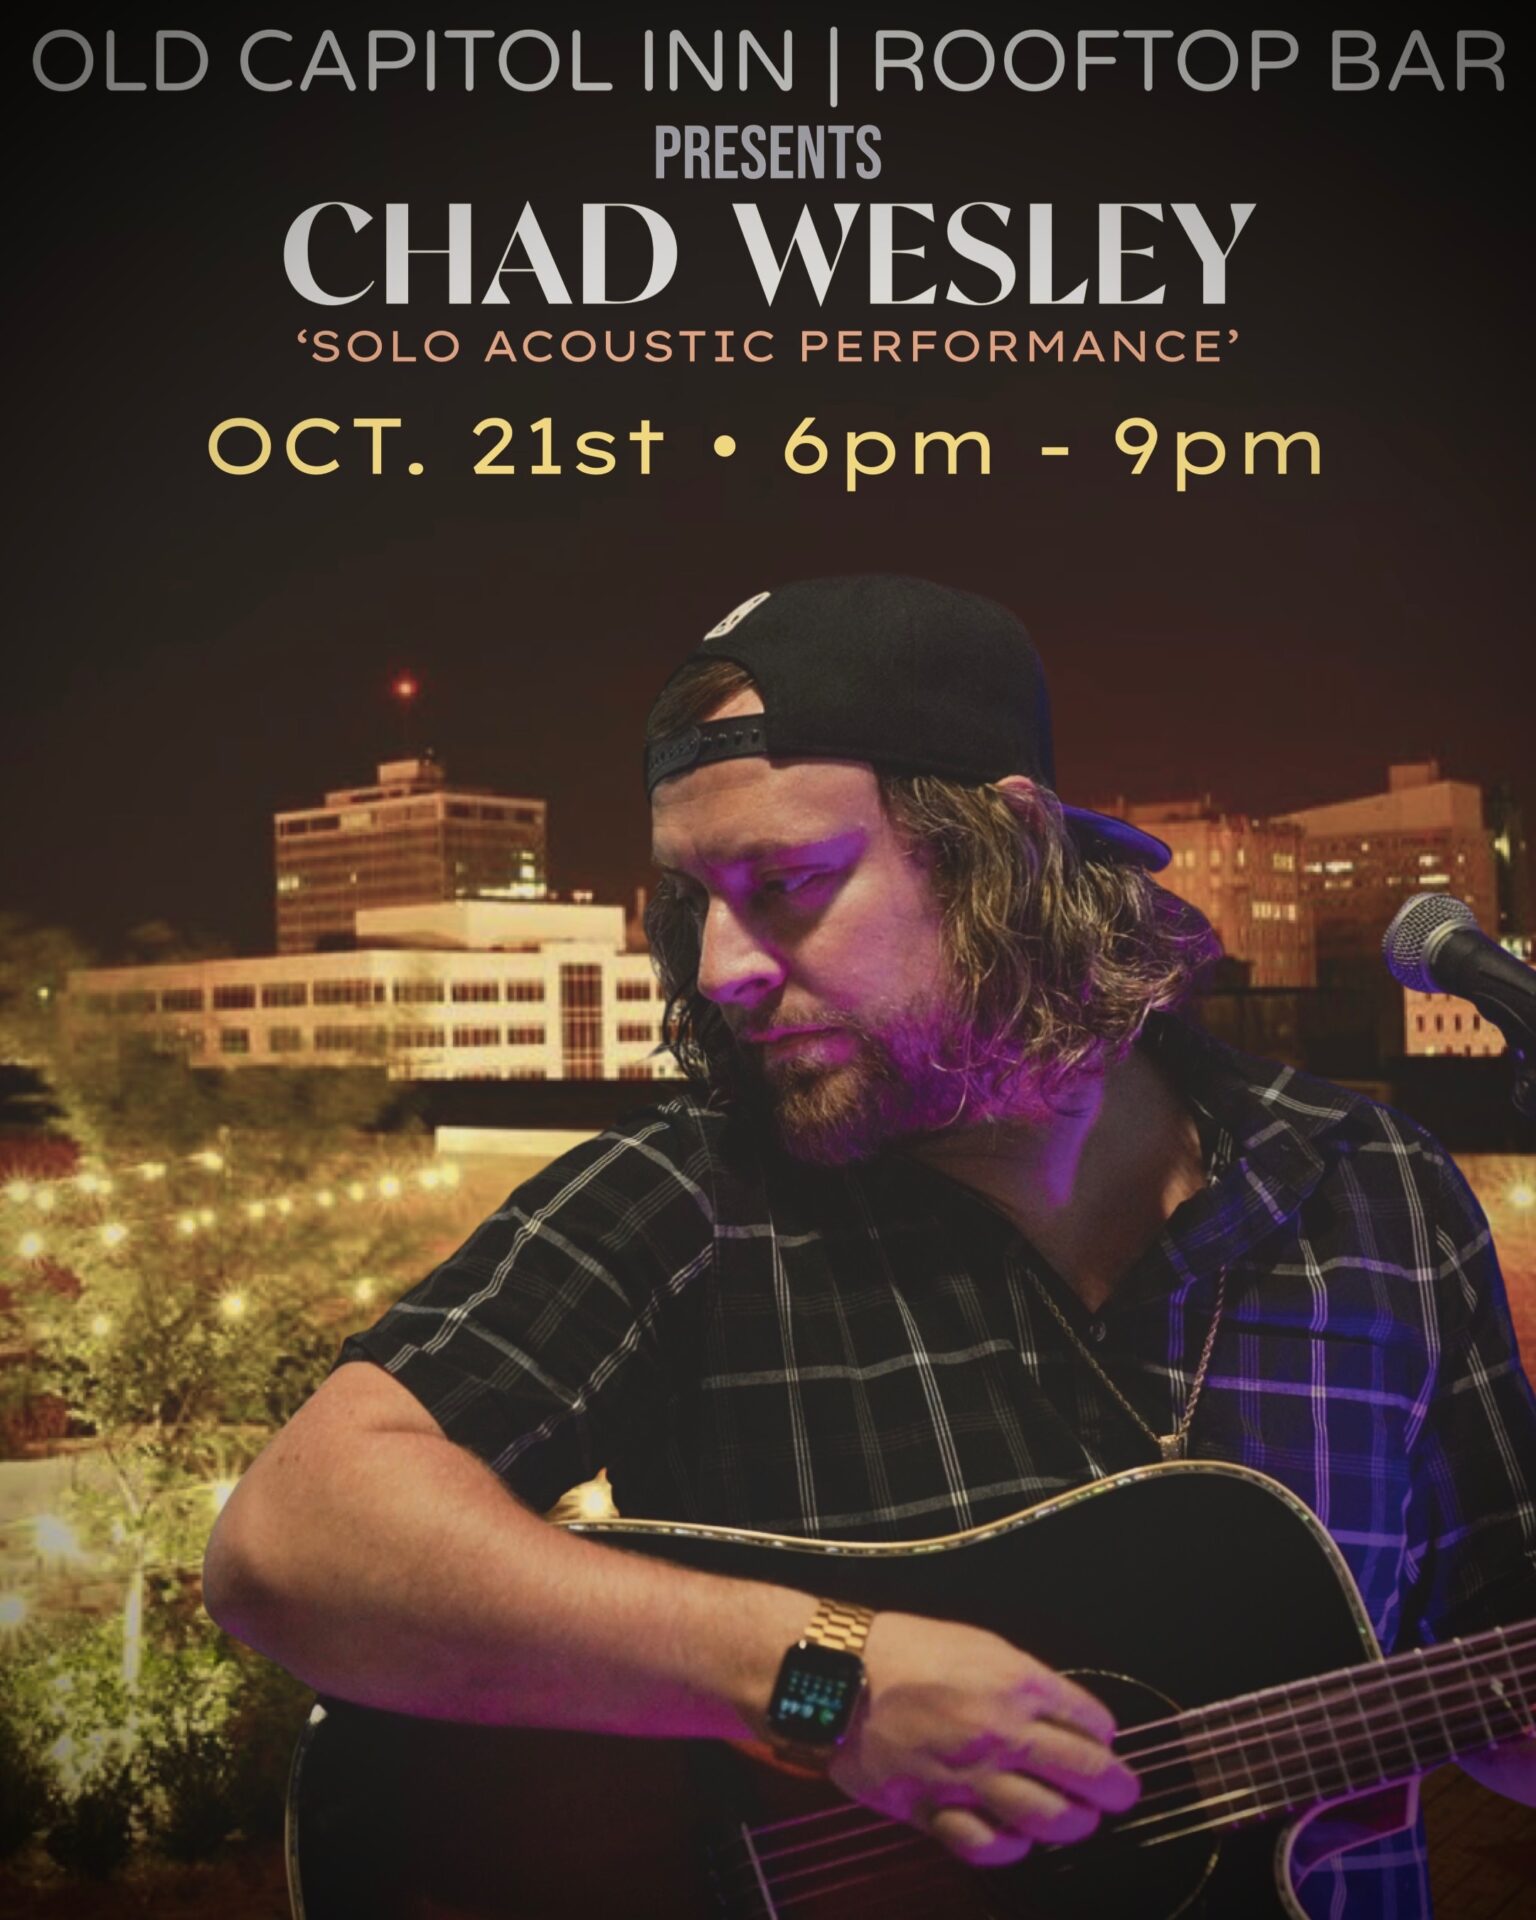 Chad Wesley | Old Capitol Inn Rooftop Bar